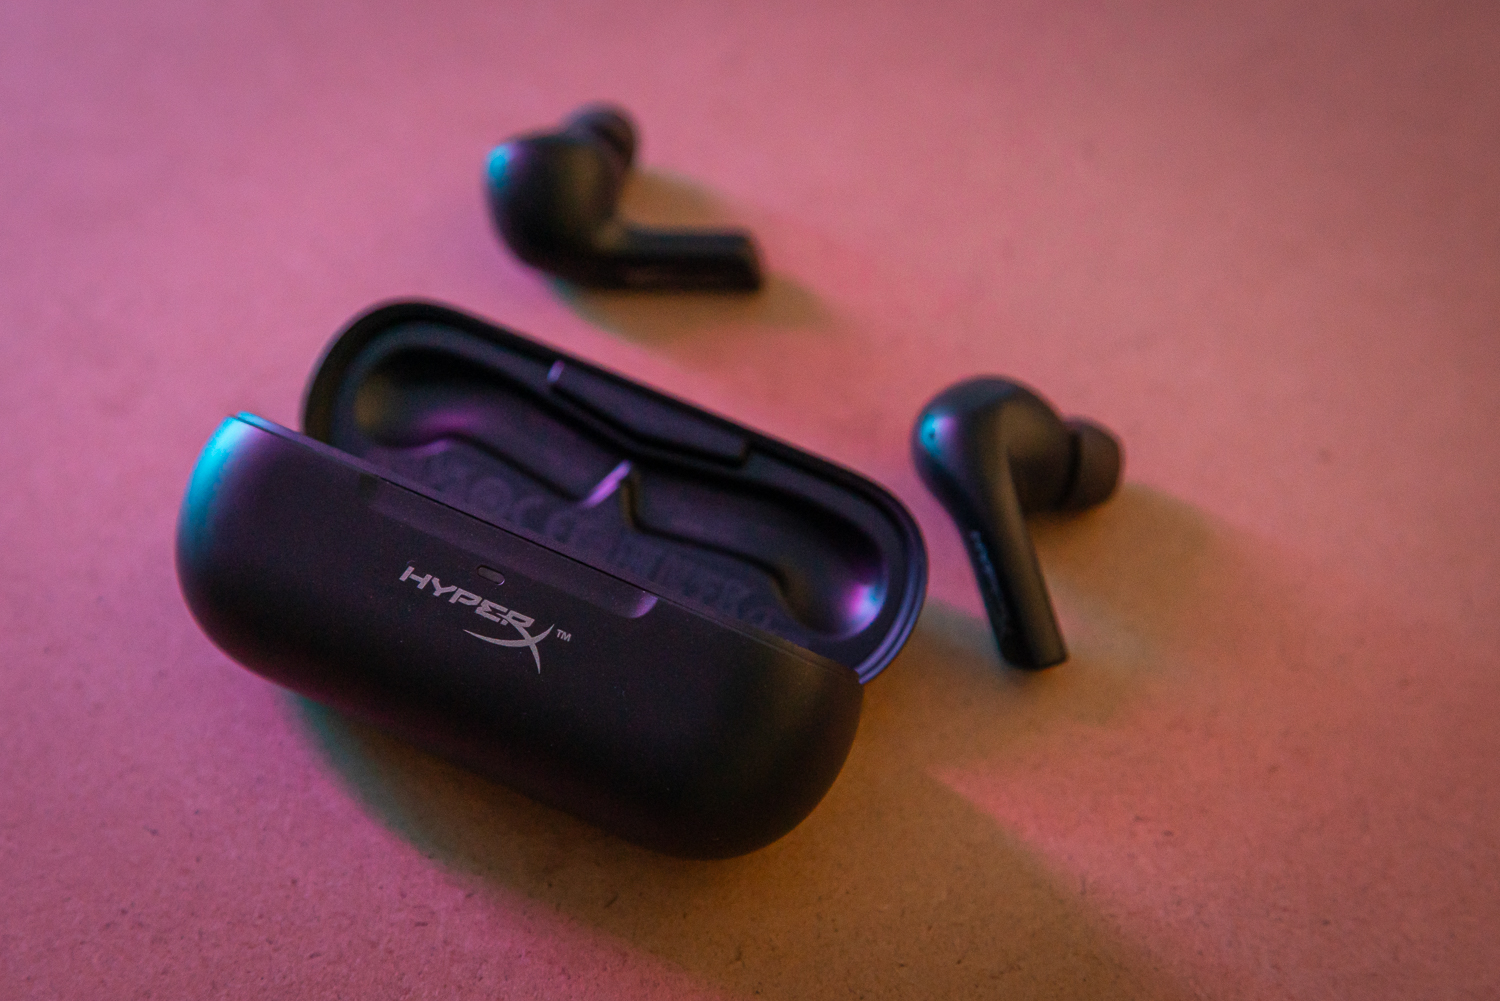 HyperX Cloud Alpha earbuds sitting outside their case on a table.